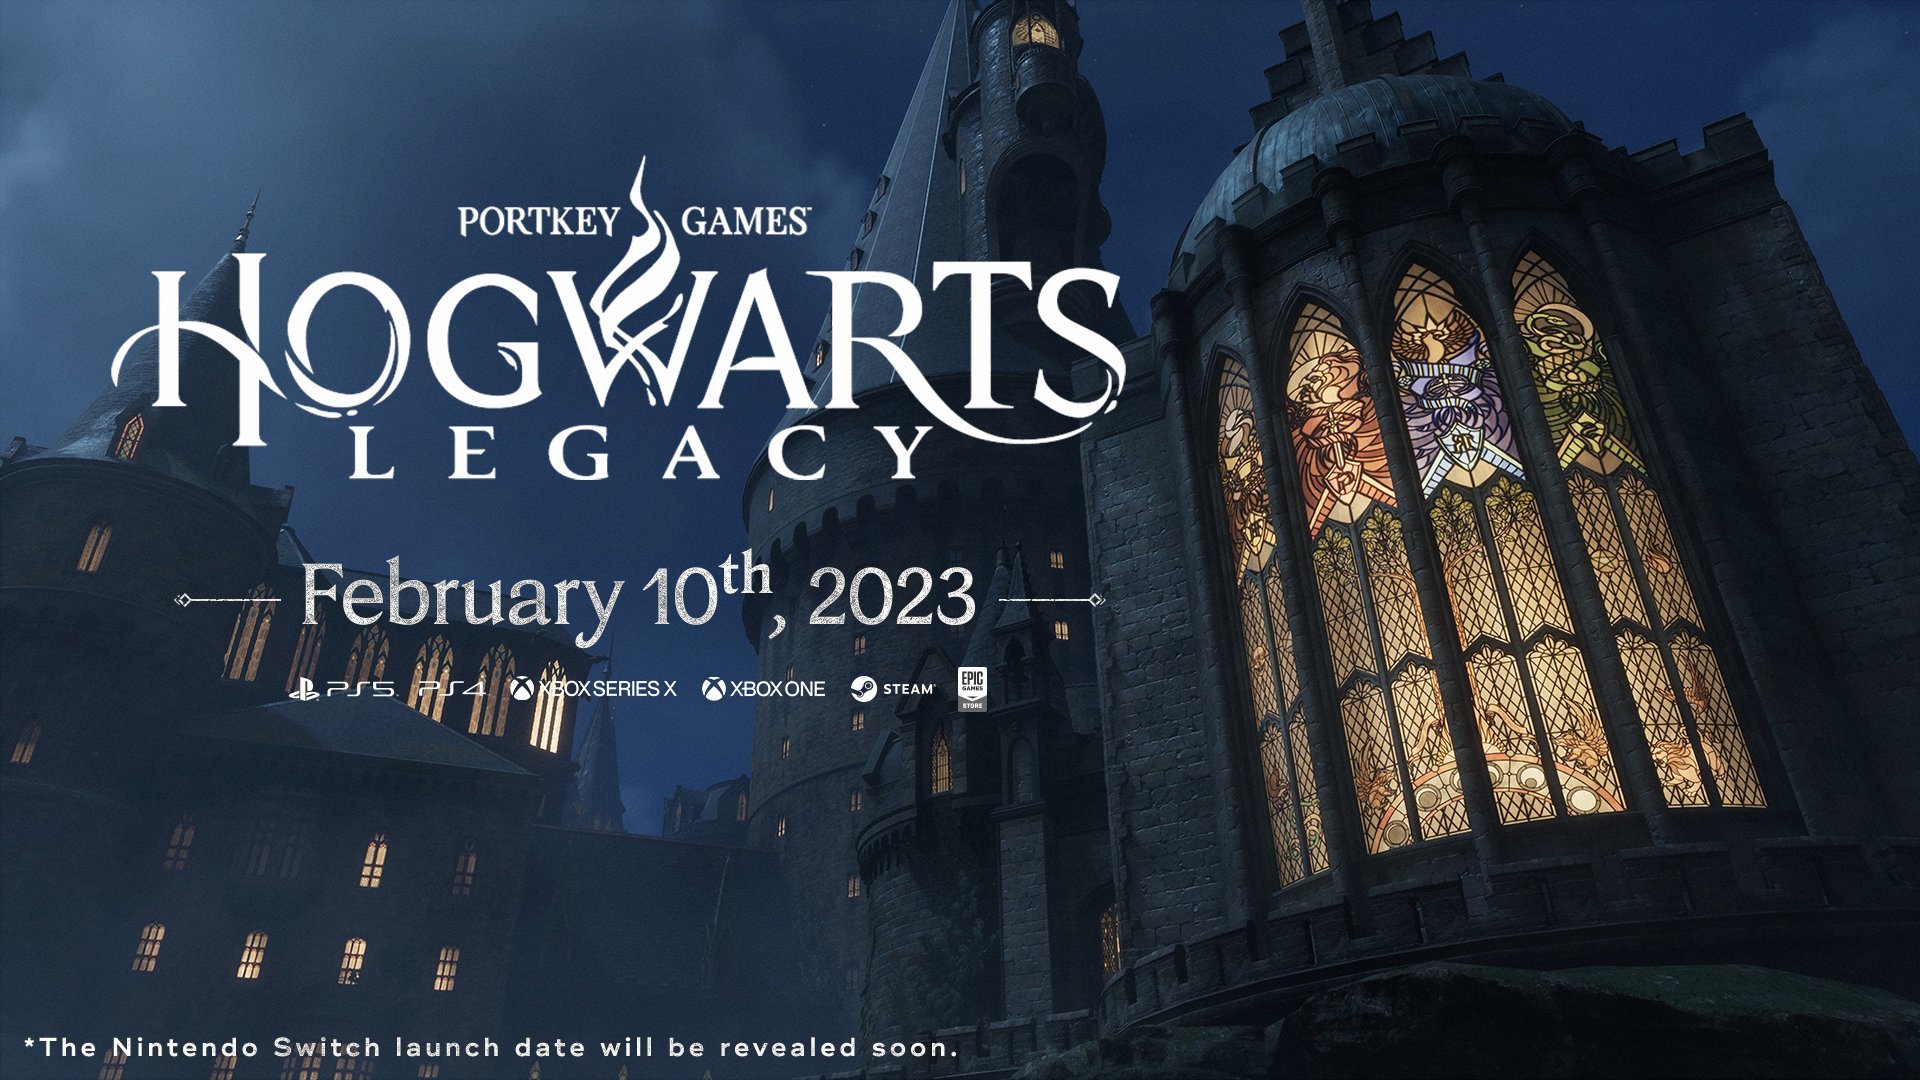 Hogwarts Legacy release date on Xbox One, PlayStation 4 delayed